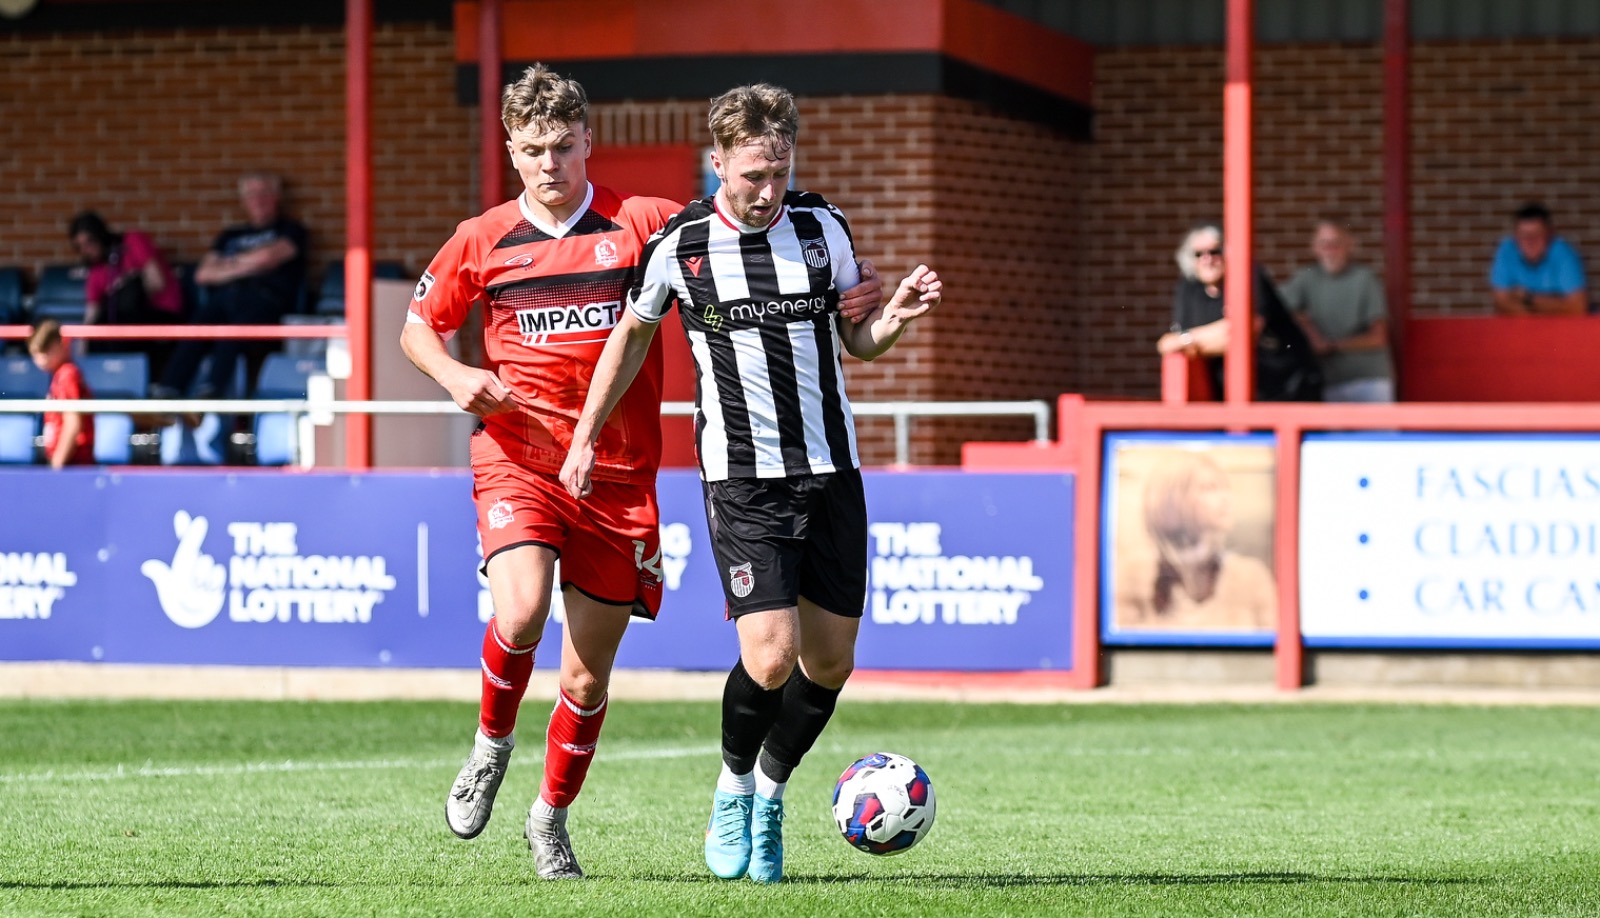 Grimsby Town football player in action against Alfreton Town